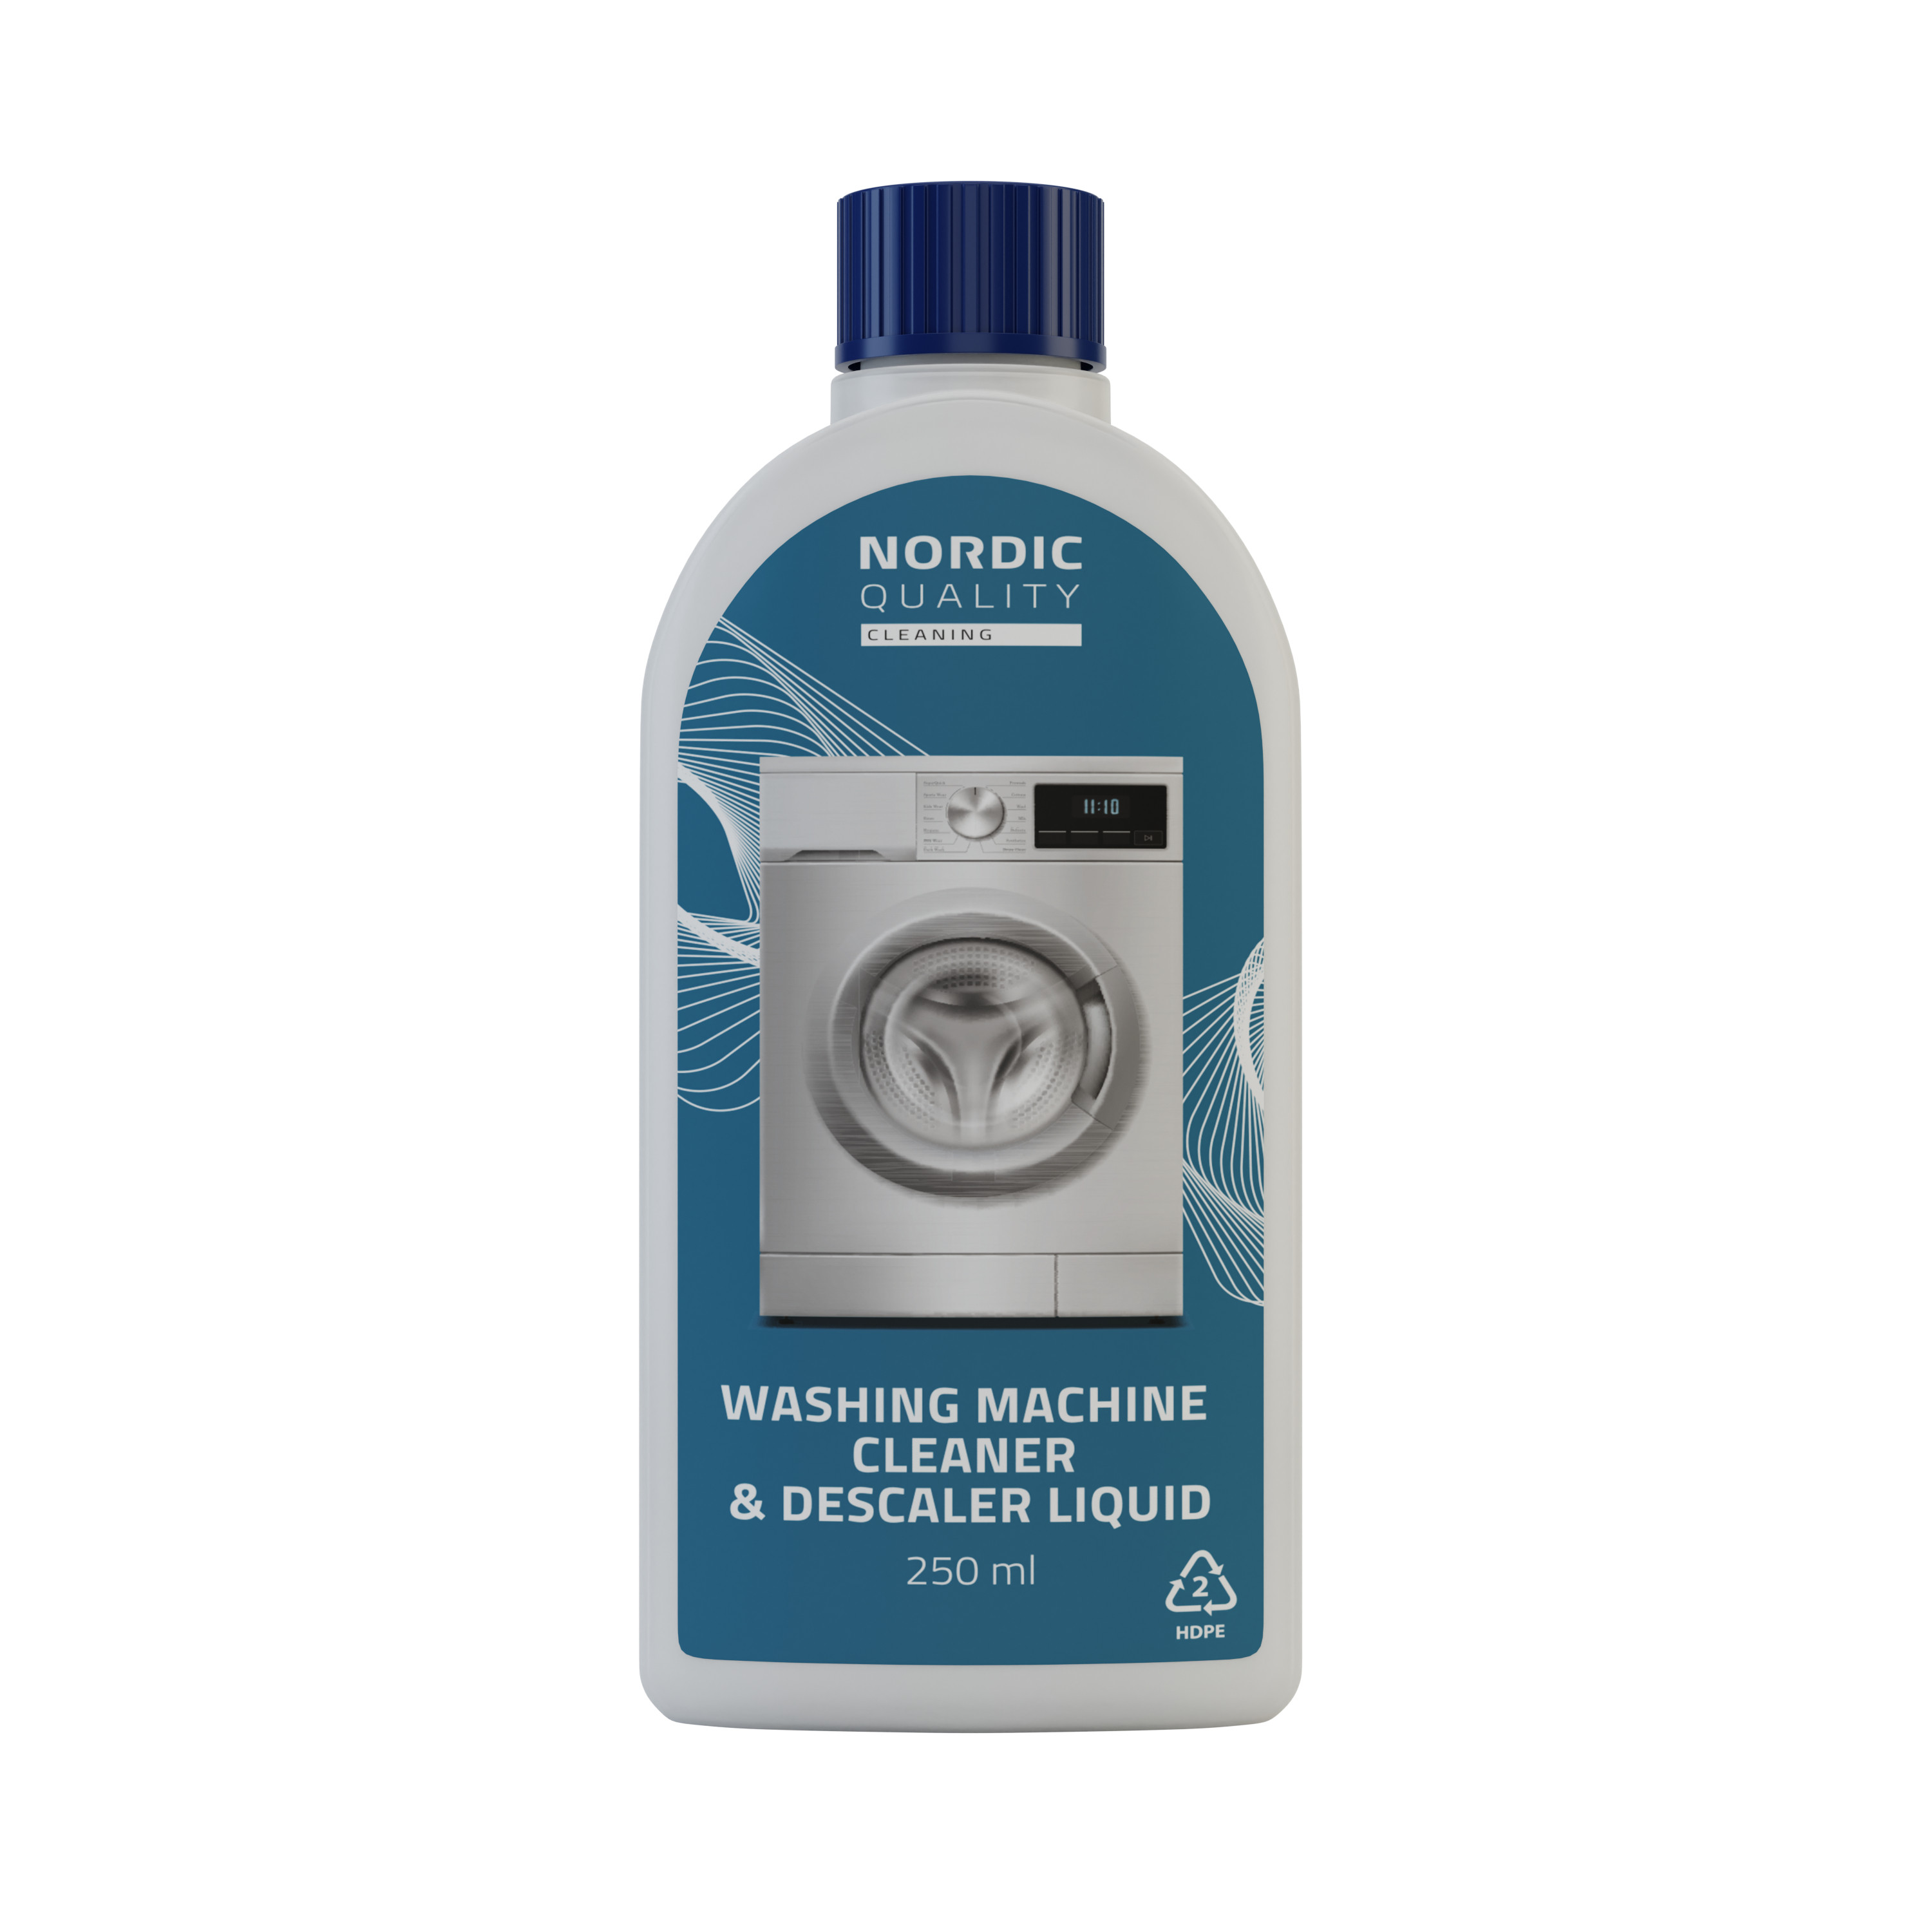 Nordic Quality Cleaning liquid for washing machines, 250 ml / 2340040